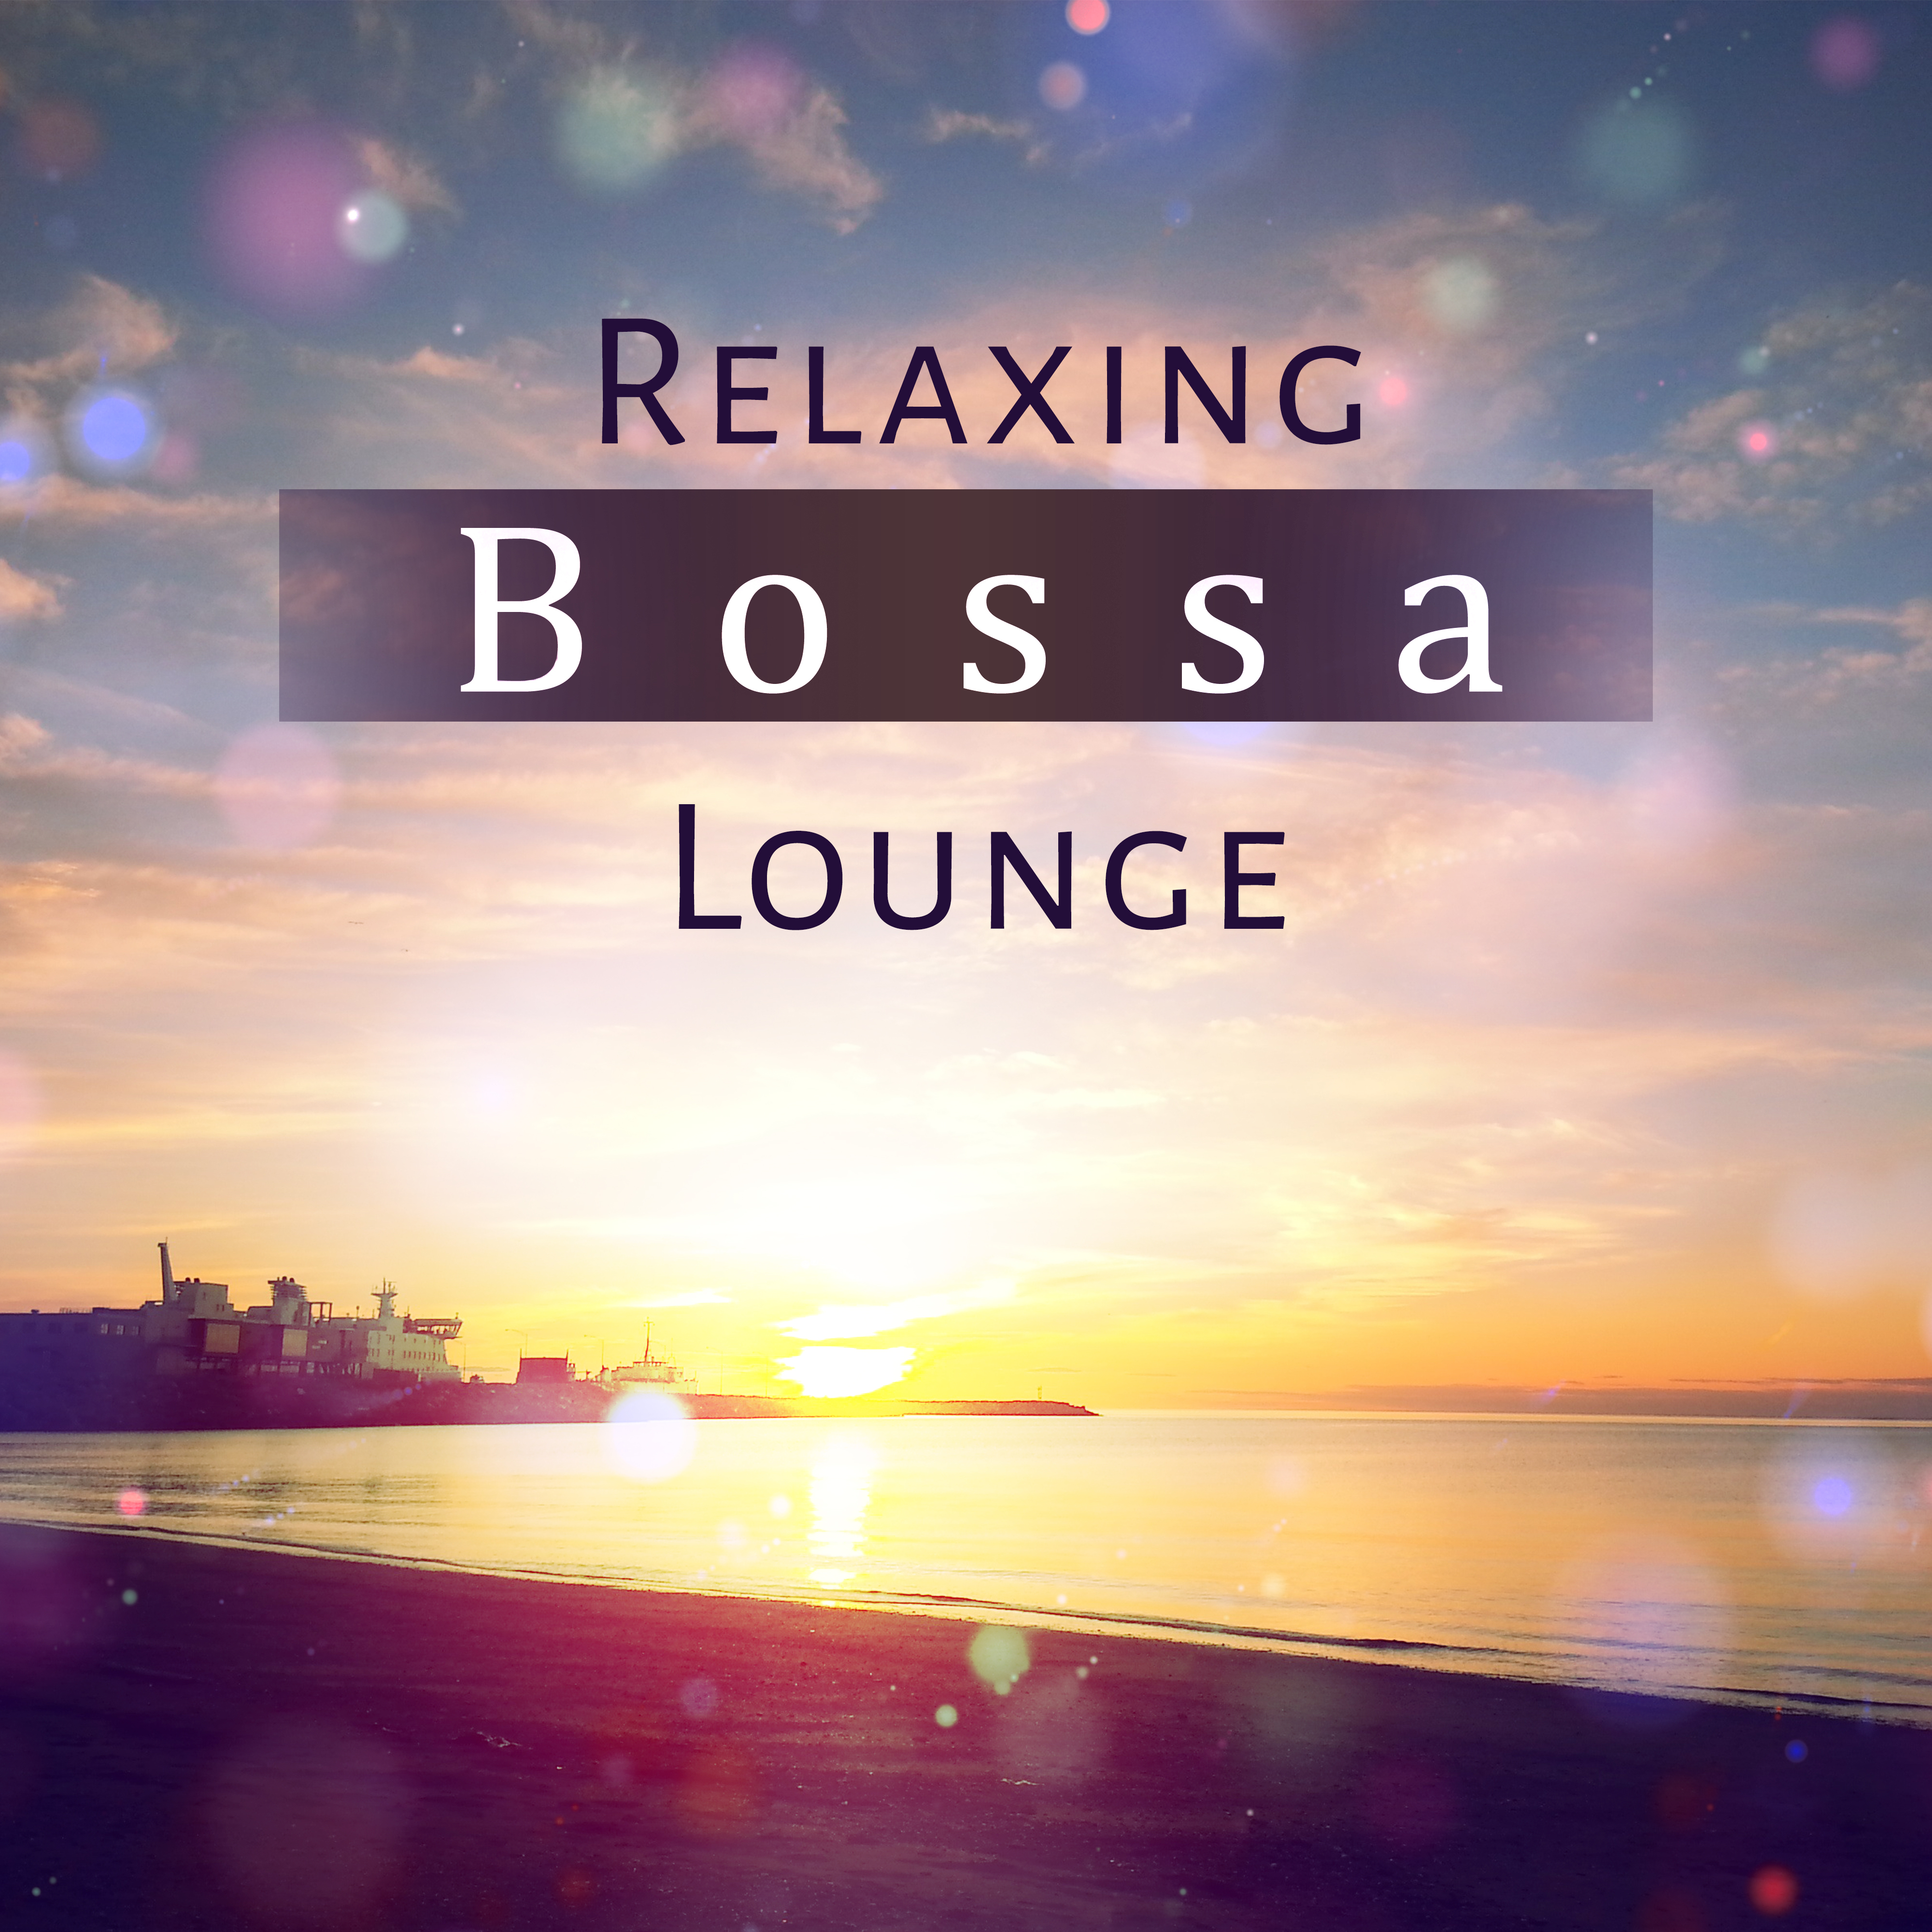 Relaxing Bossa Lounge – Healing Nature Music, Best Relaxation, New Age, Relaxing Music, Ambient Rest Therapy